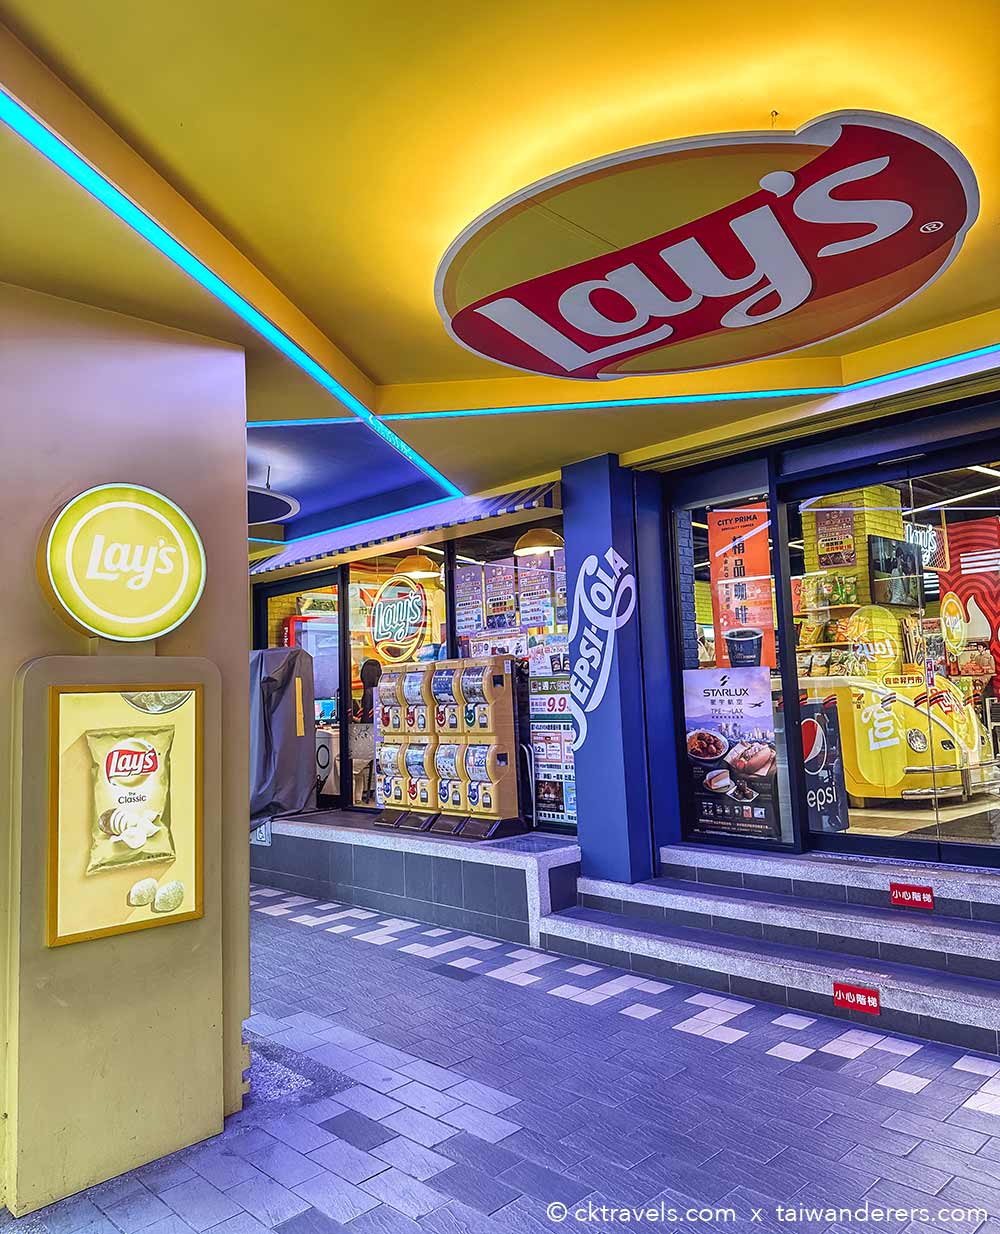 Lay's potato chips crisps themed 7-eleven convenience store in Taipei Taiwan